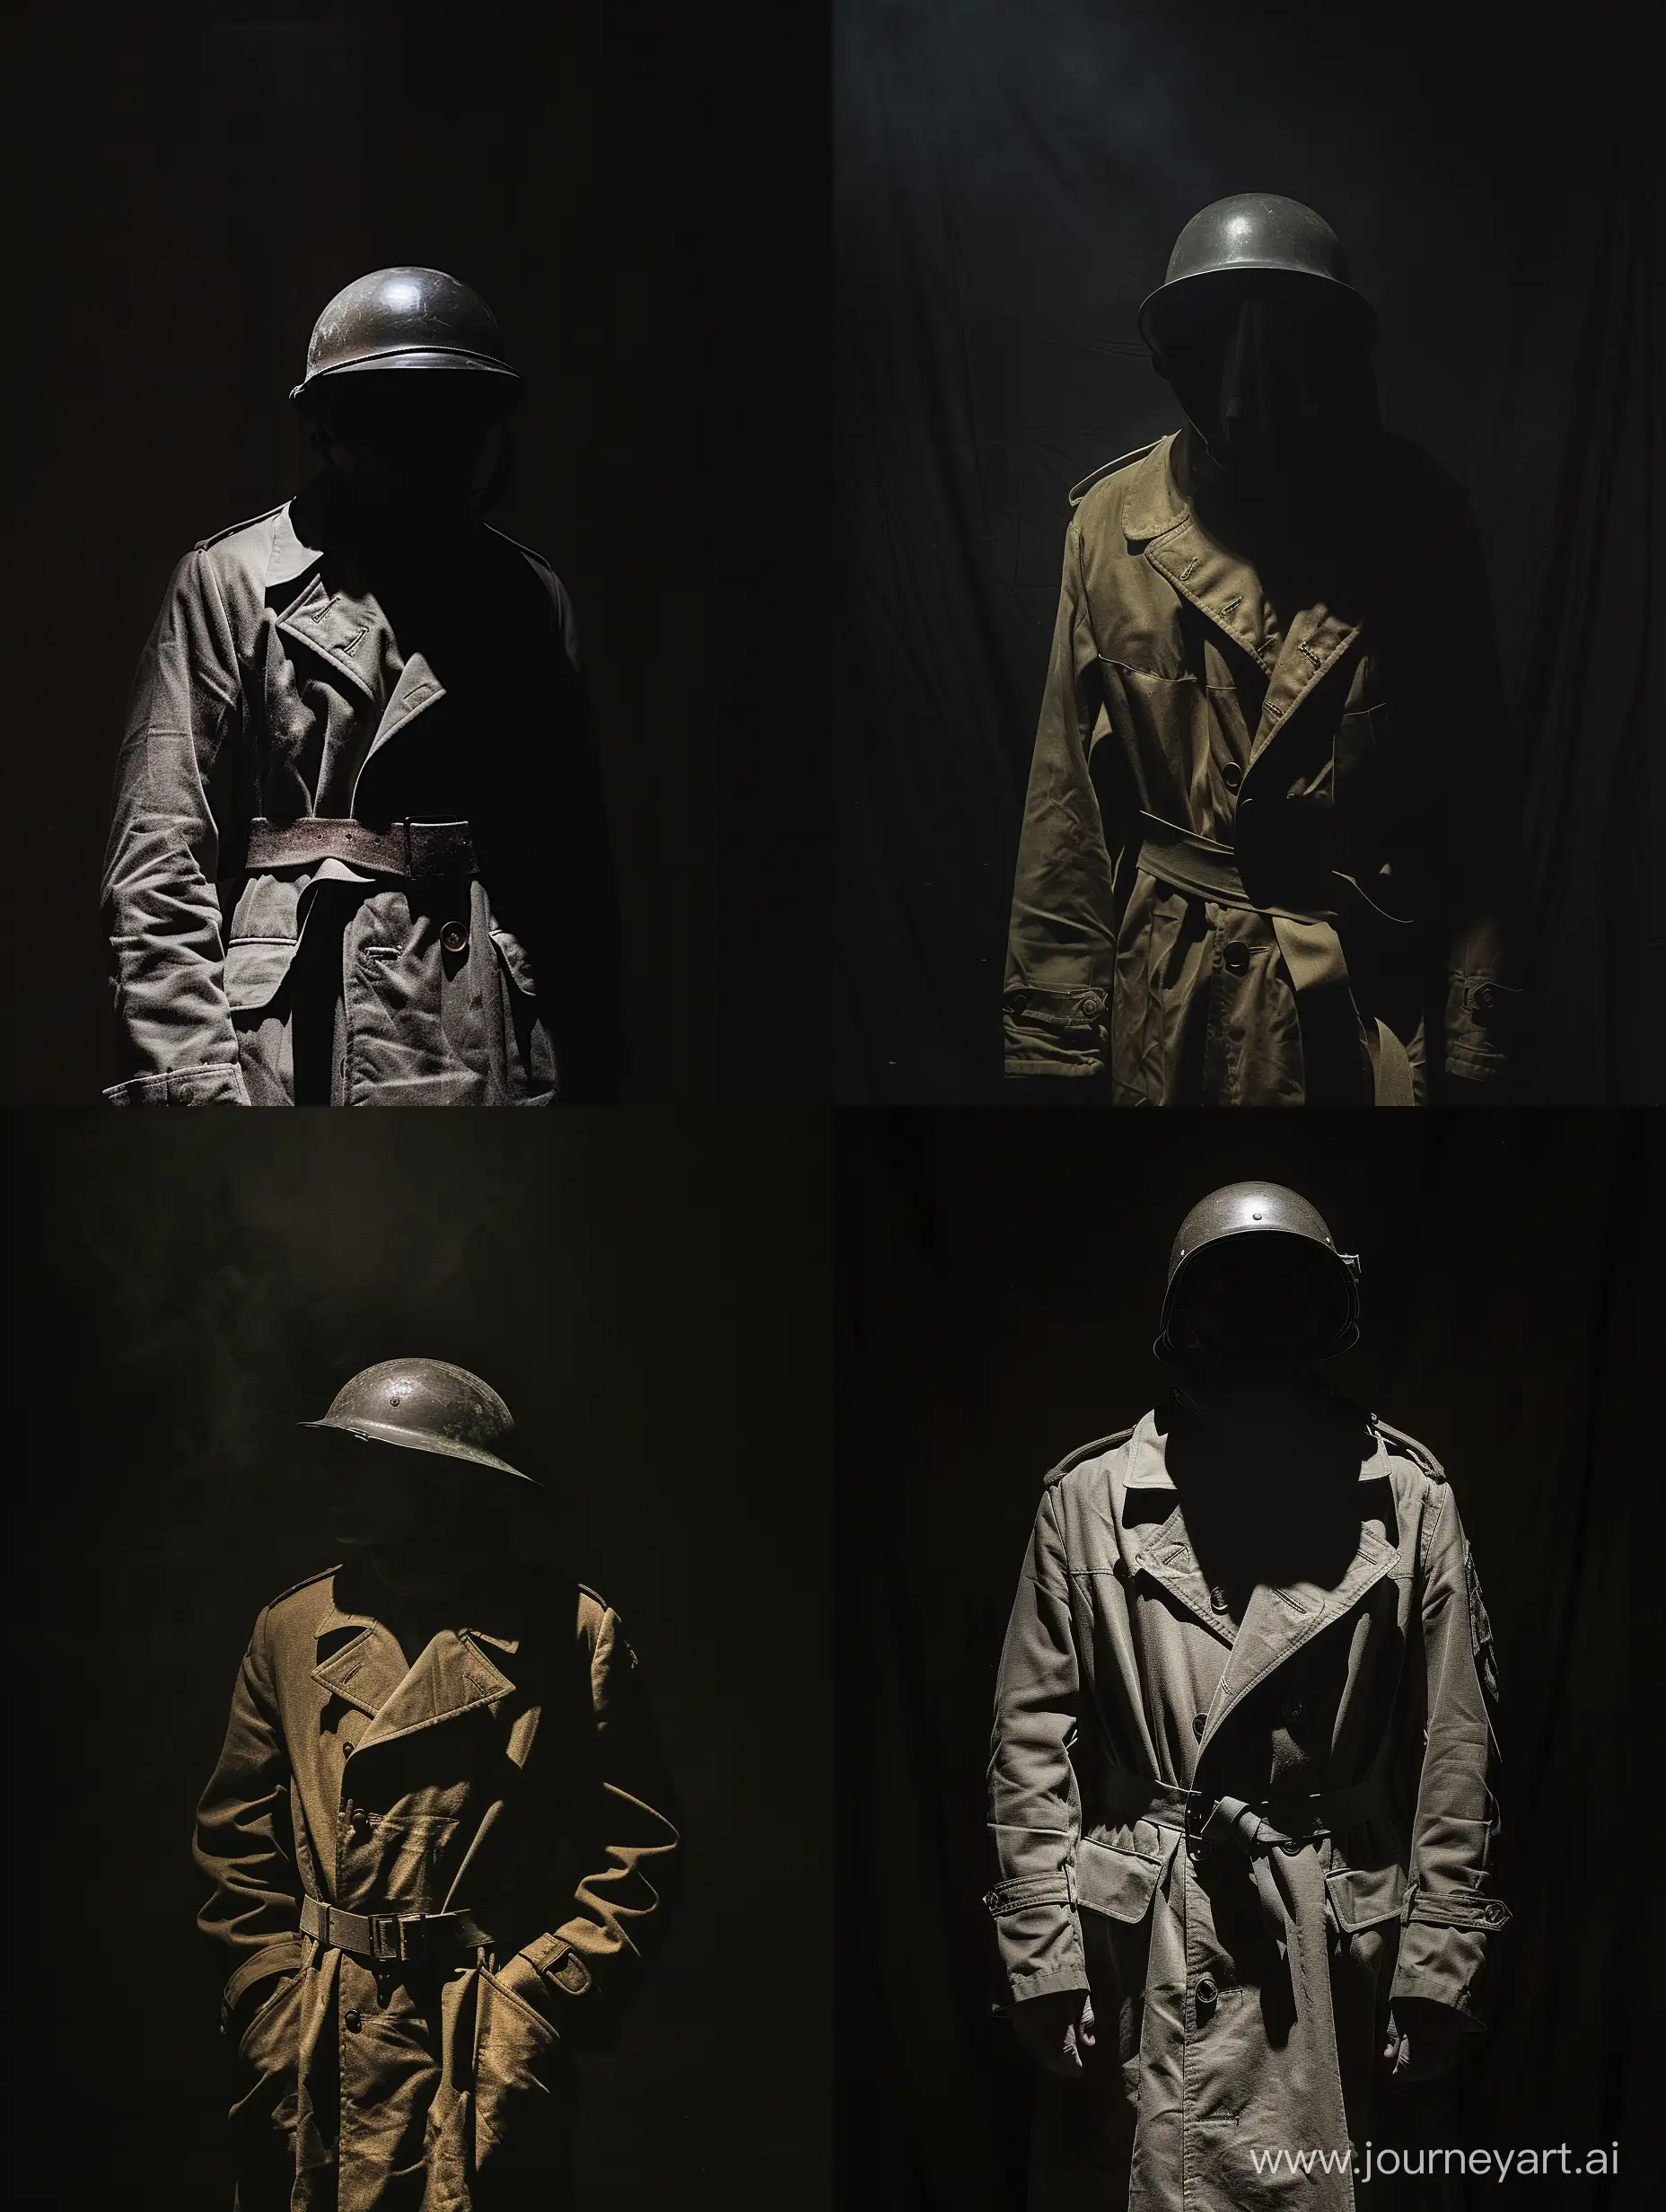 an extra dramatic photograph of a World War 1 British Soldier wearing a trench coat in a pitch black room with a stage light on him, shadow from his British helmet hiding his face